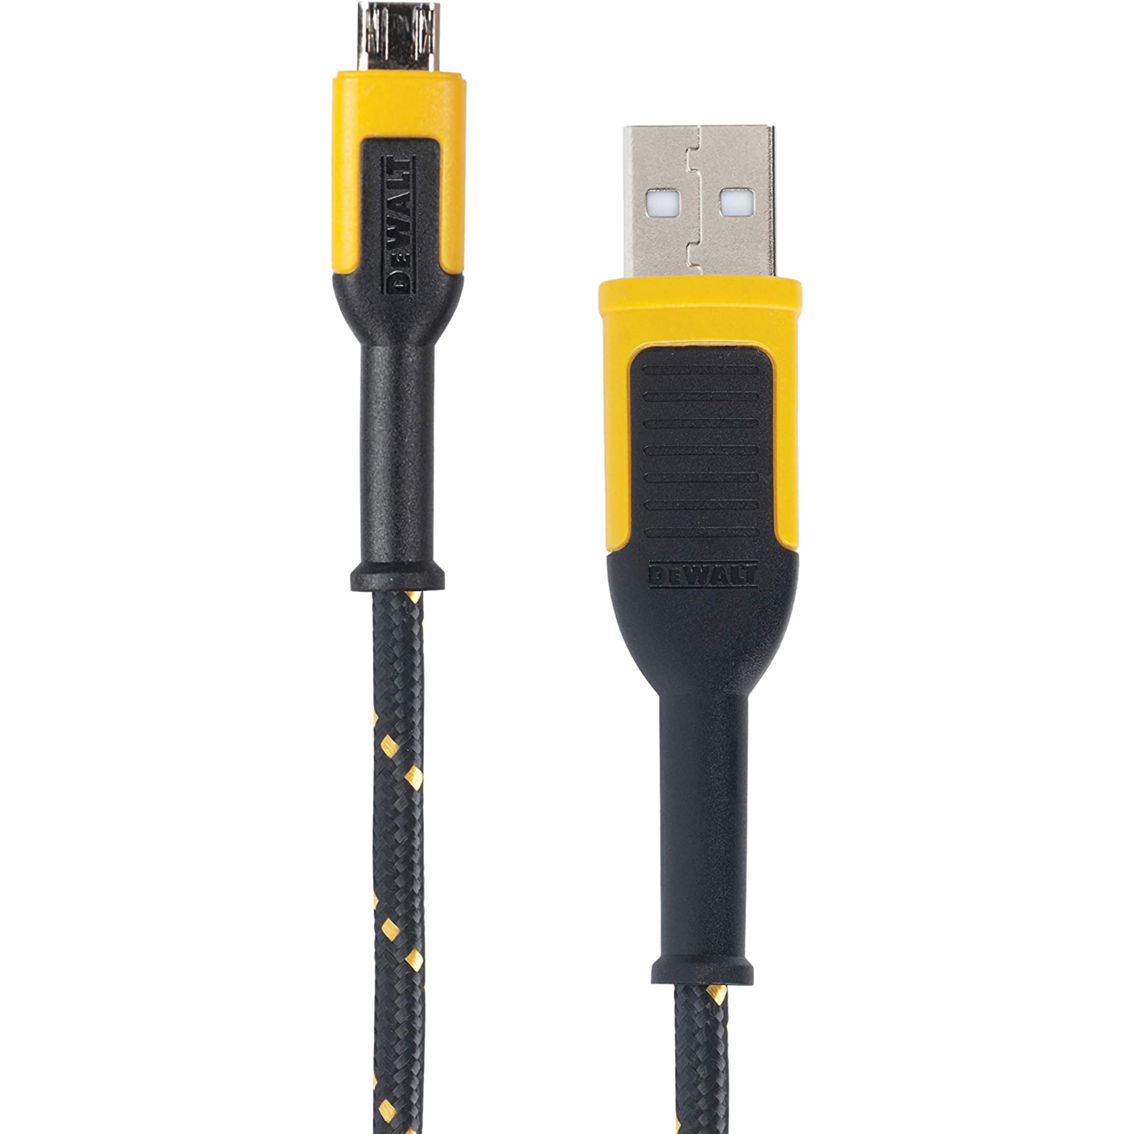 DeWalt 6 ft. Reinforced Braided Charging Cable for Micro-USB - Image 2 of 4